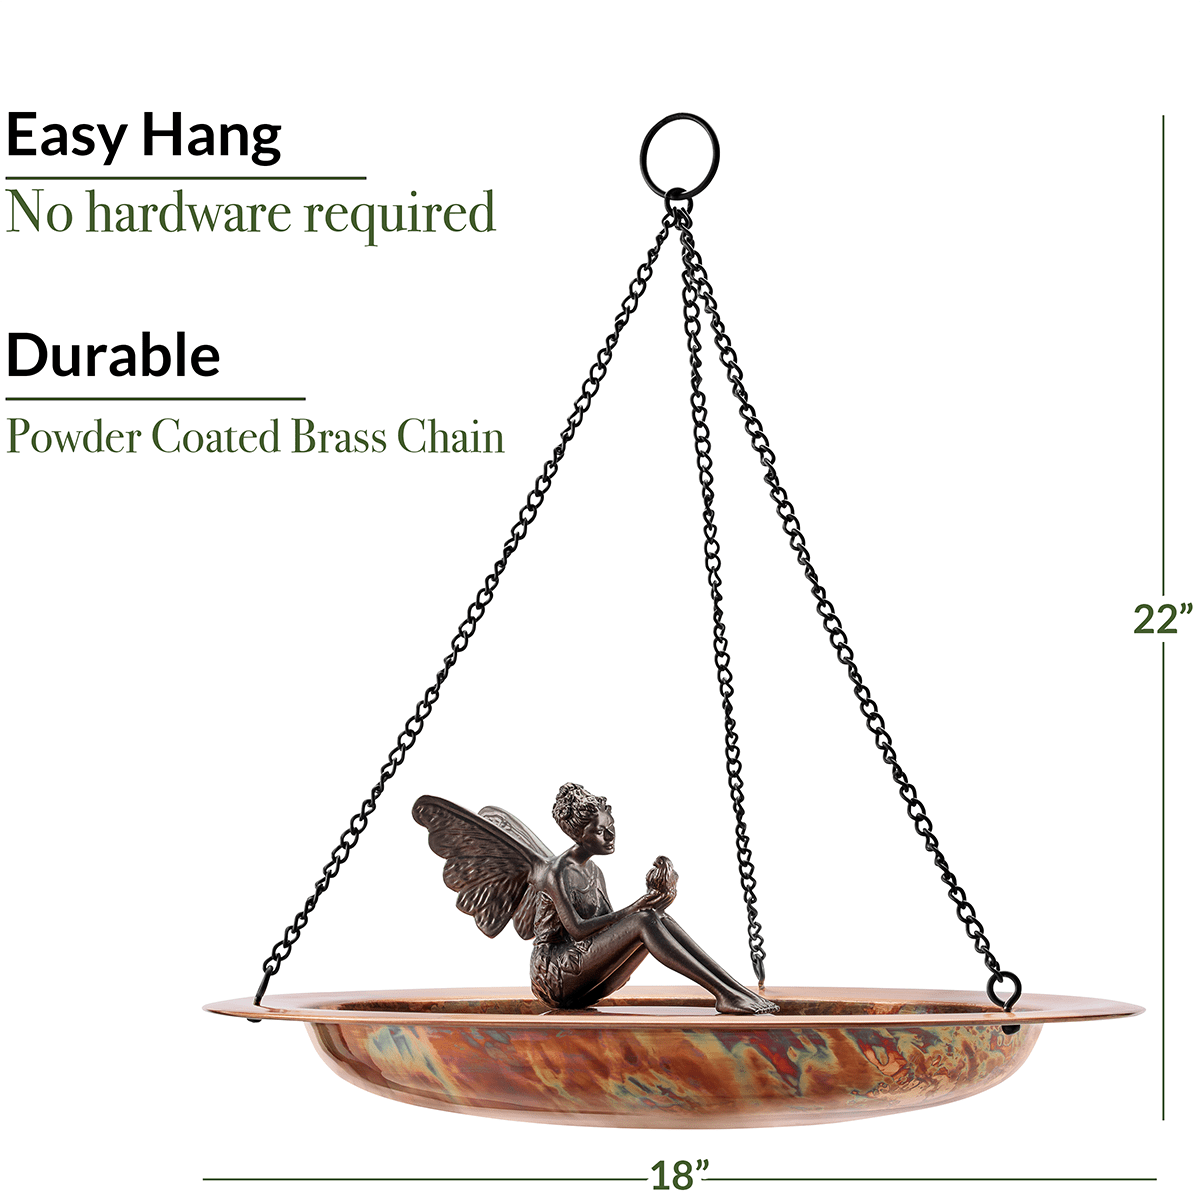 18" Hanging Fired Copper Bird Bath with Fairy - Good Directions